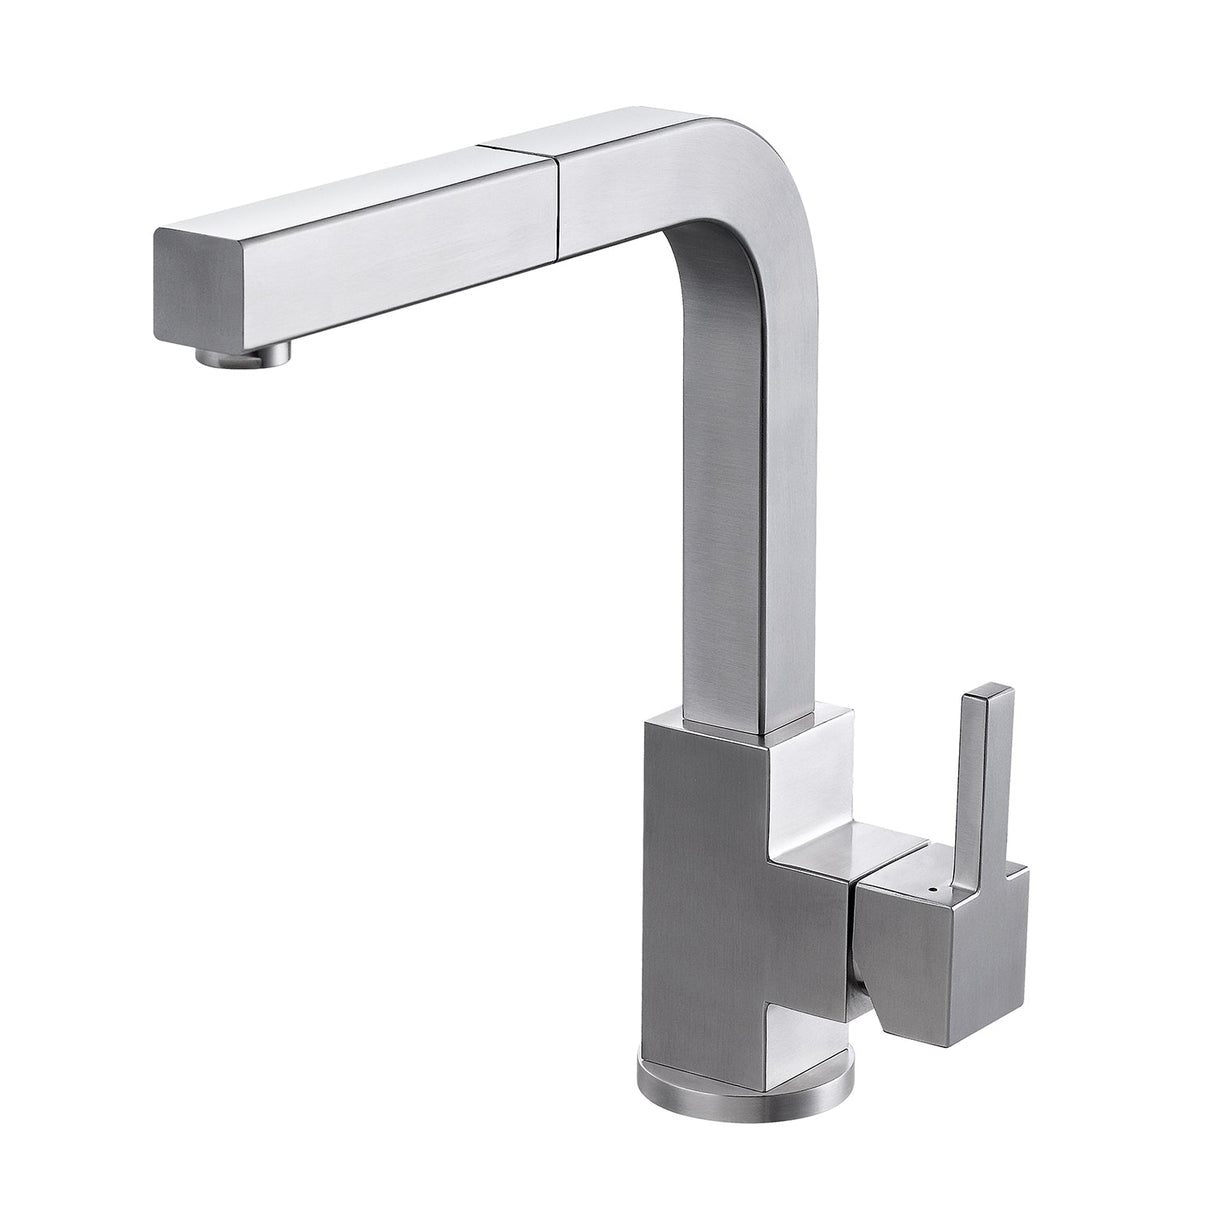 DAX Stainless Steel Single Handle Pull Down Kitchen Faucet, Nickel DAX-12072-BN